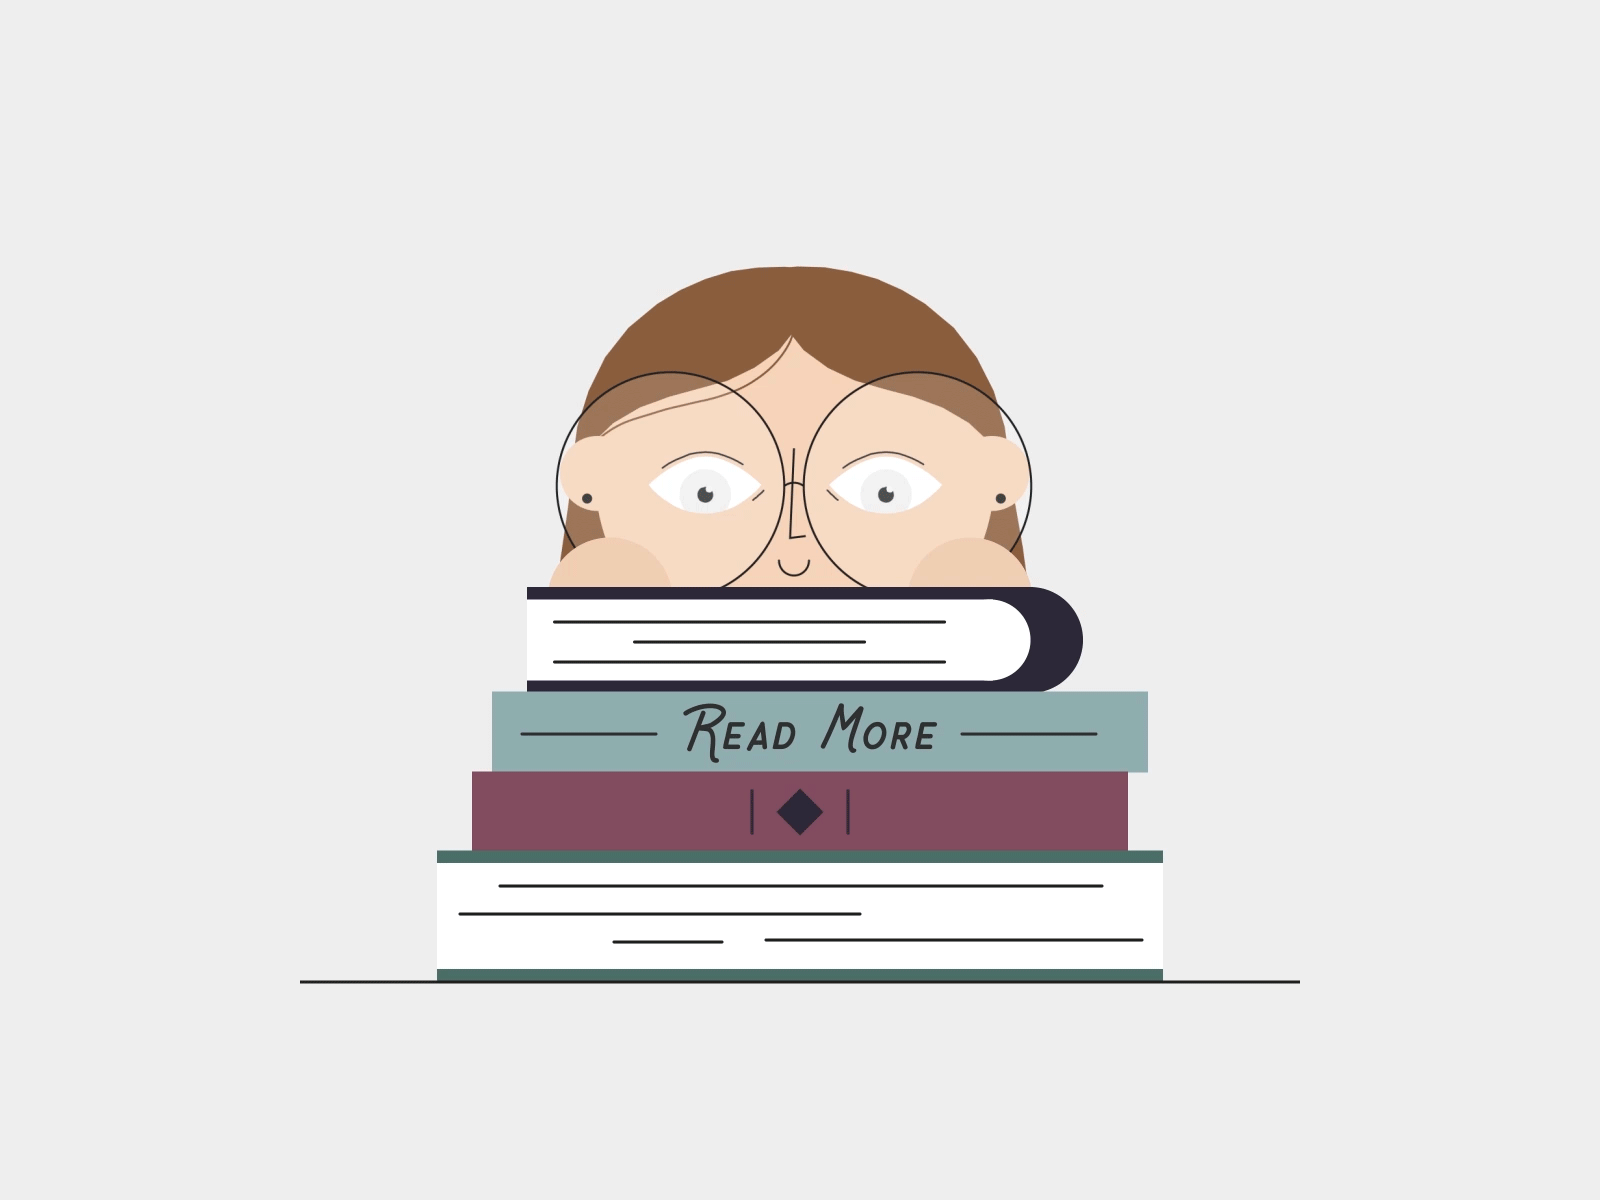 Read More after effects animation animation 2d book stack books character character animation design illustration loop motion graphics new peekaboo read read more repeat vector